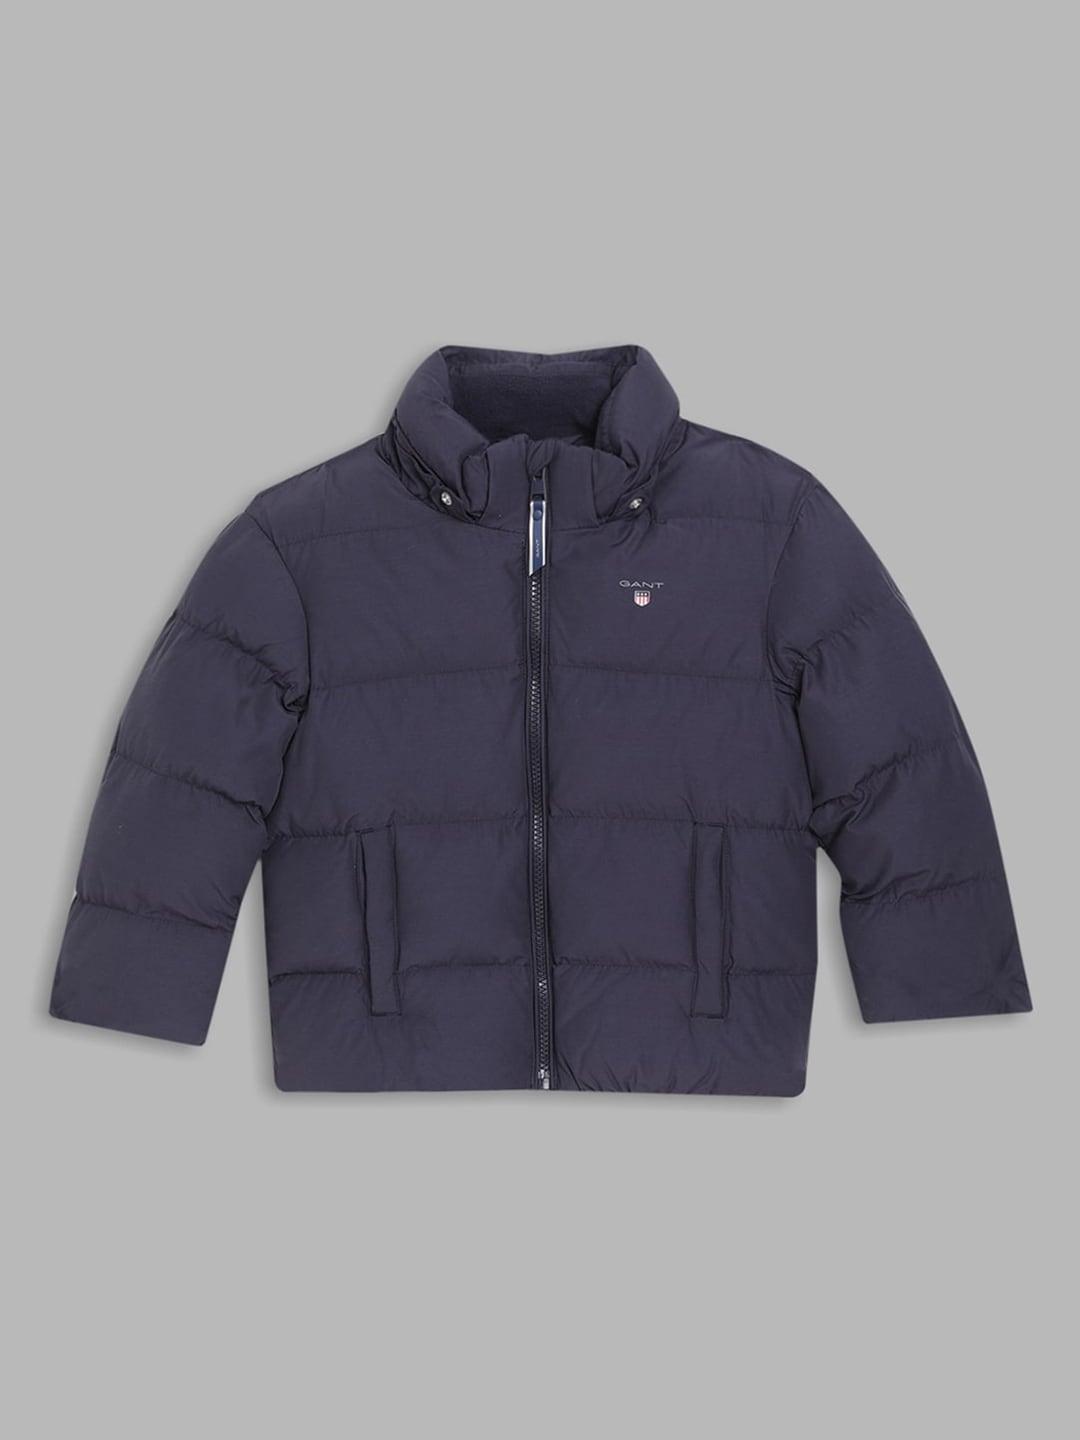 gant boys navy blue windcheater puffer jacket with embroidered